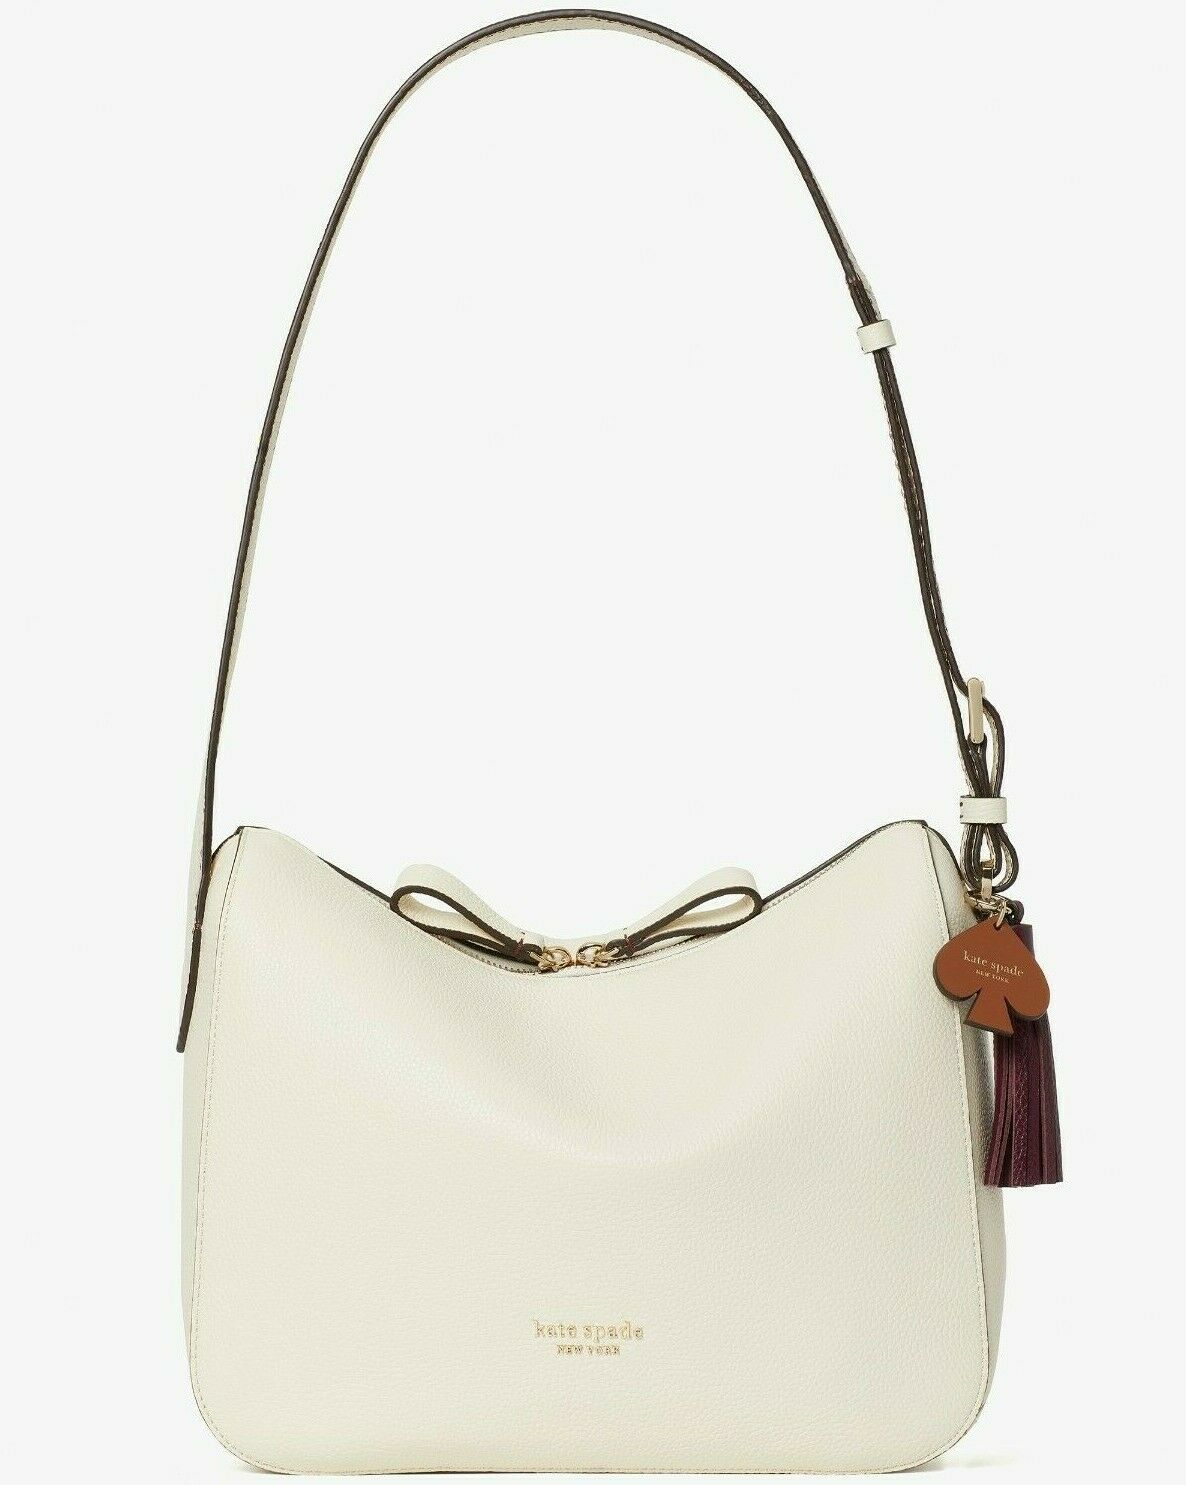 kate spade, Bags, Sale Nwt Kate Spade New York Anyday Medium Leather  Shoulder Bag In Parchment